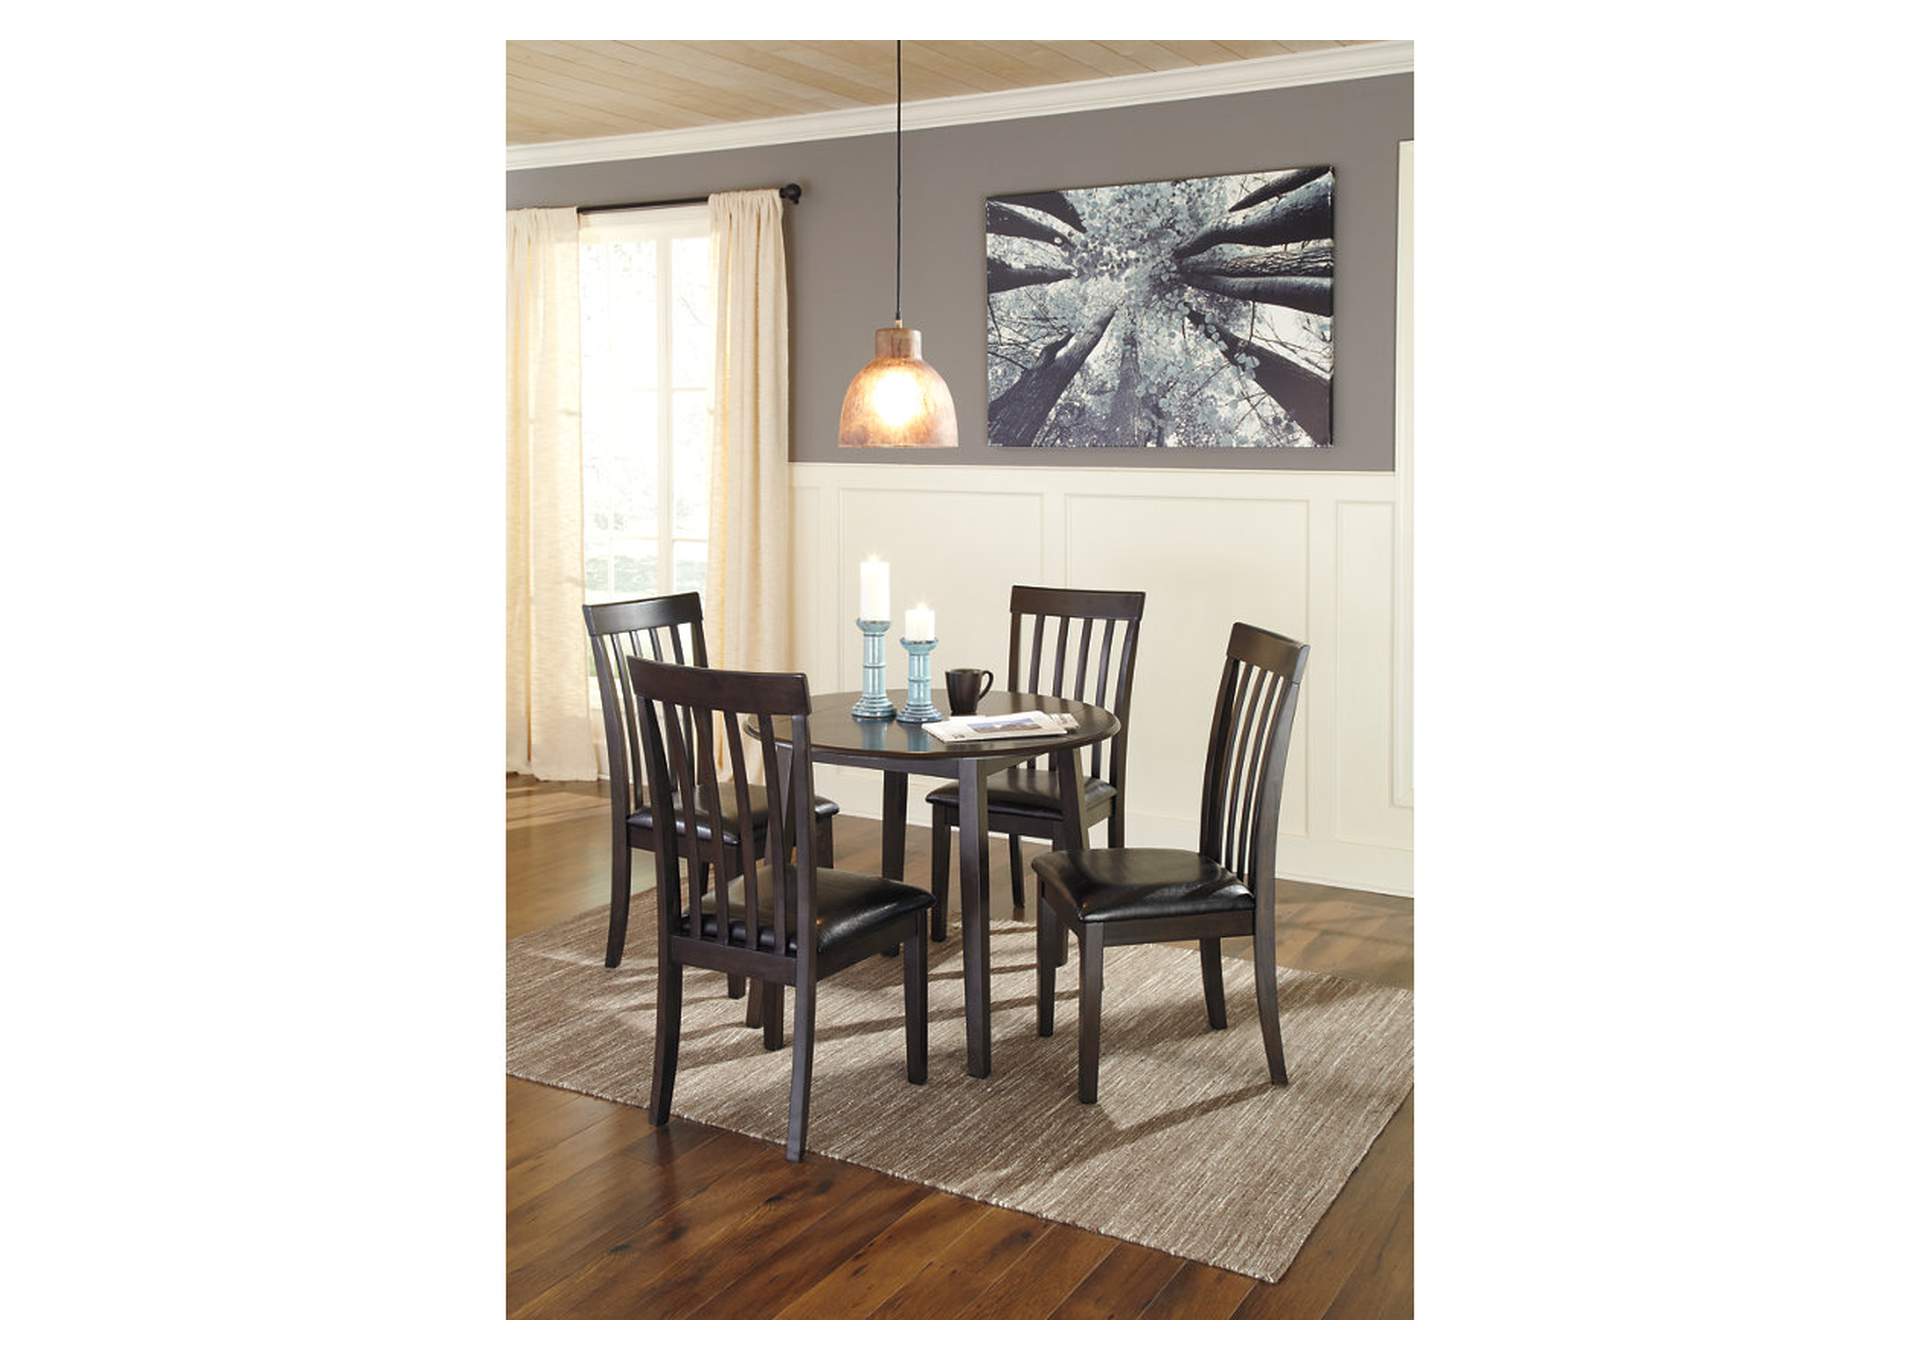 Hammis Dining Table and 4 Chairs,Signature Design By Ashley